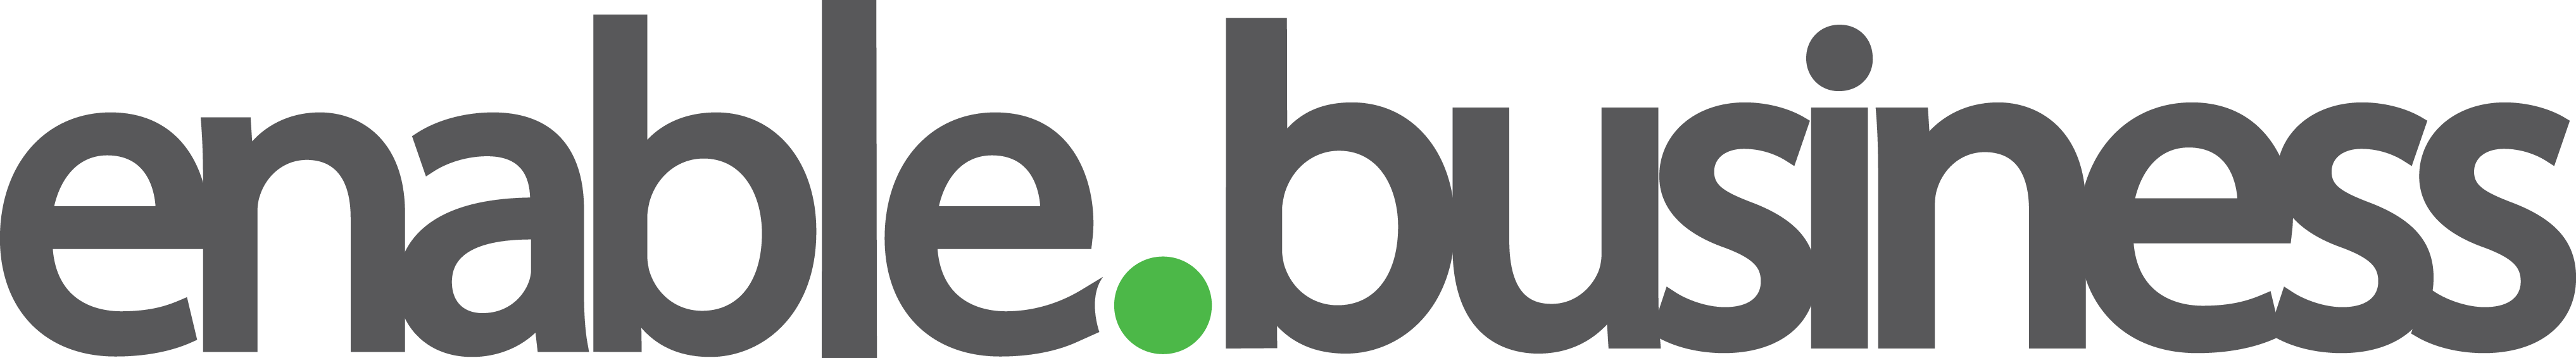 Enable Business logo Text